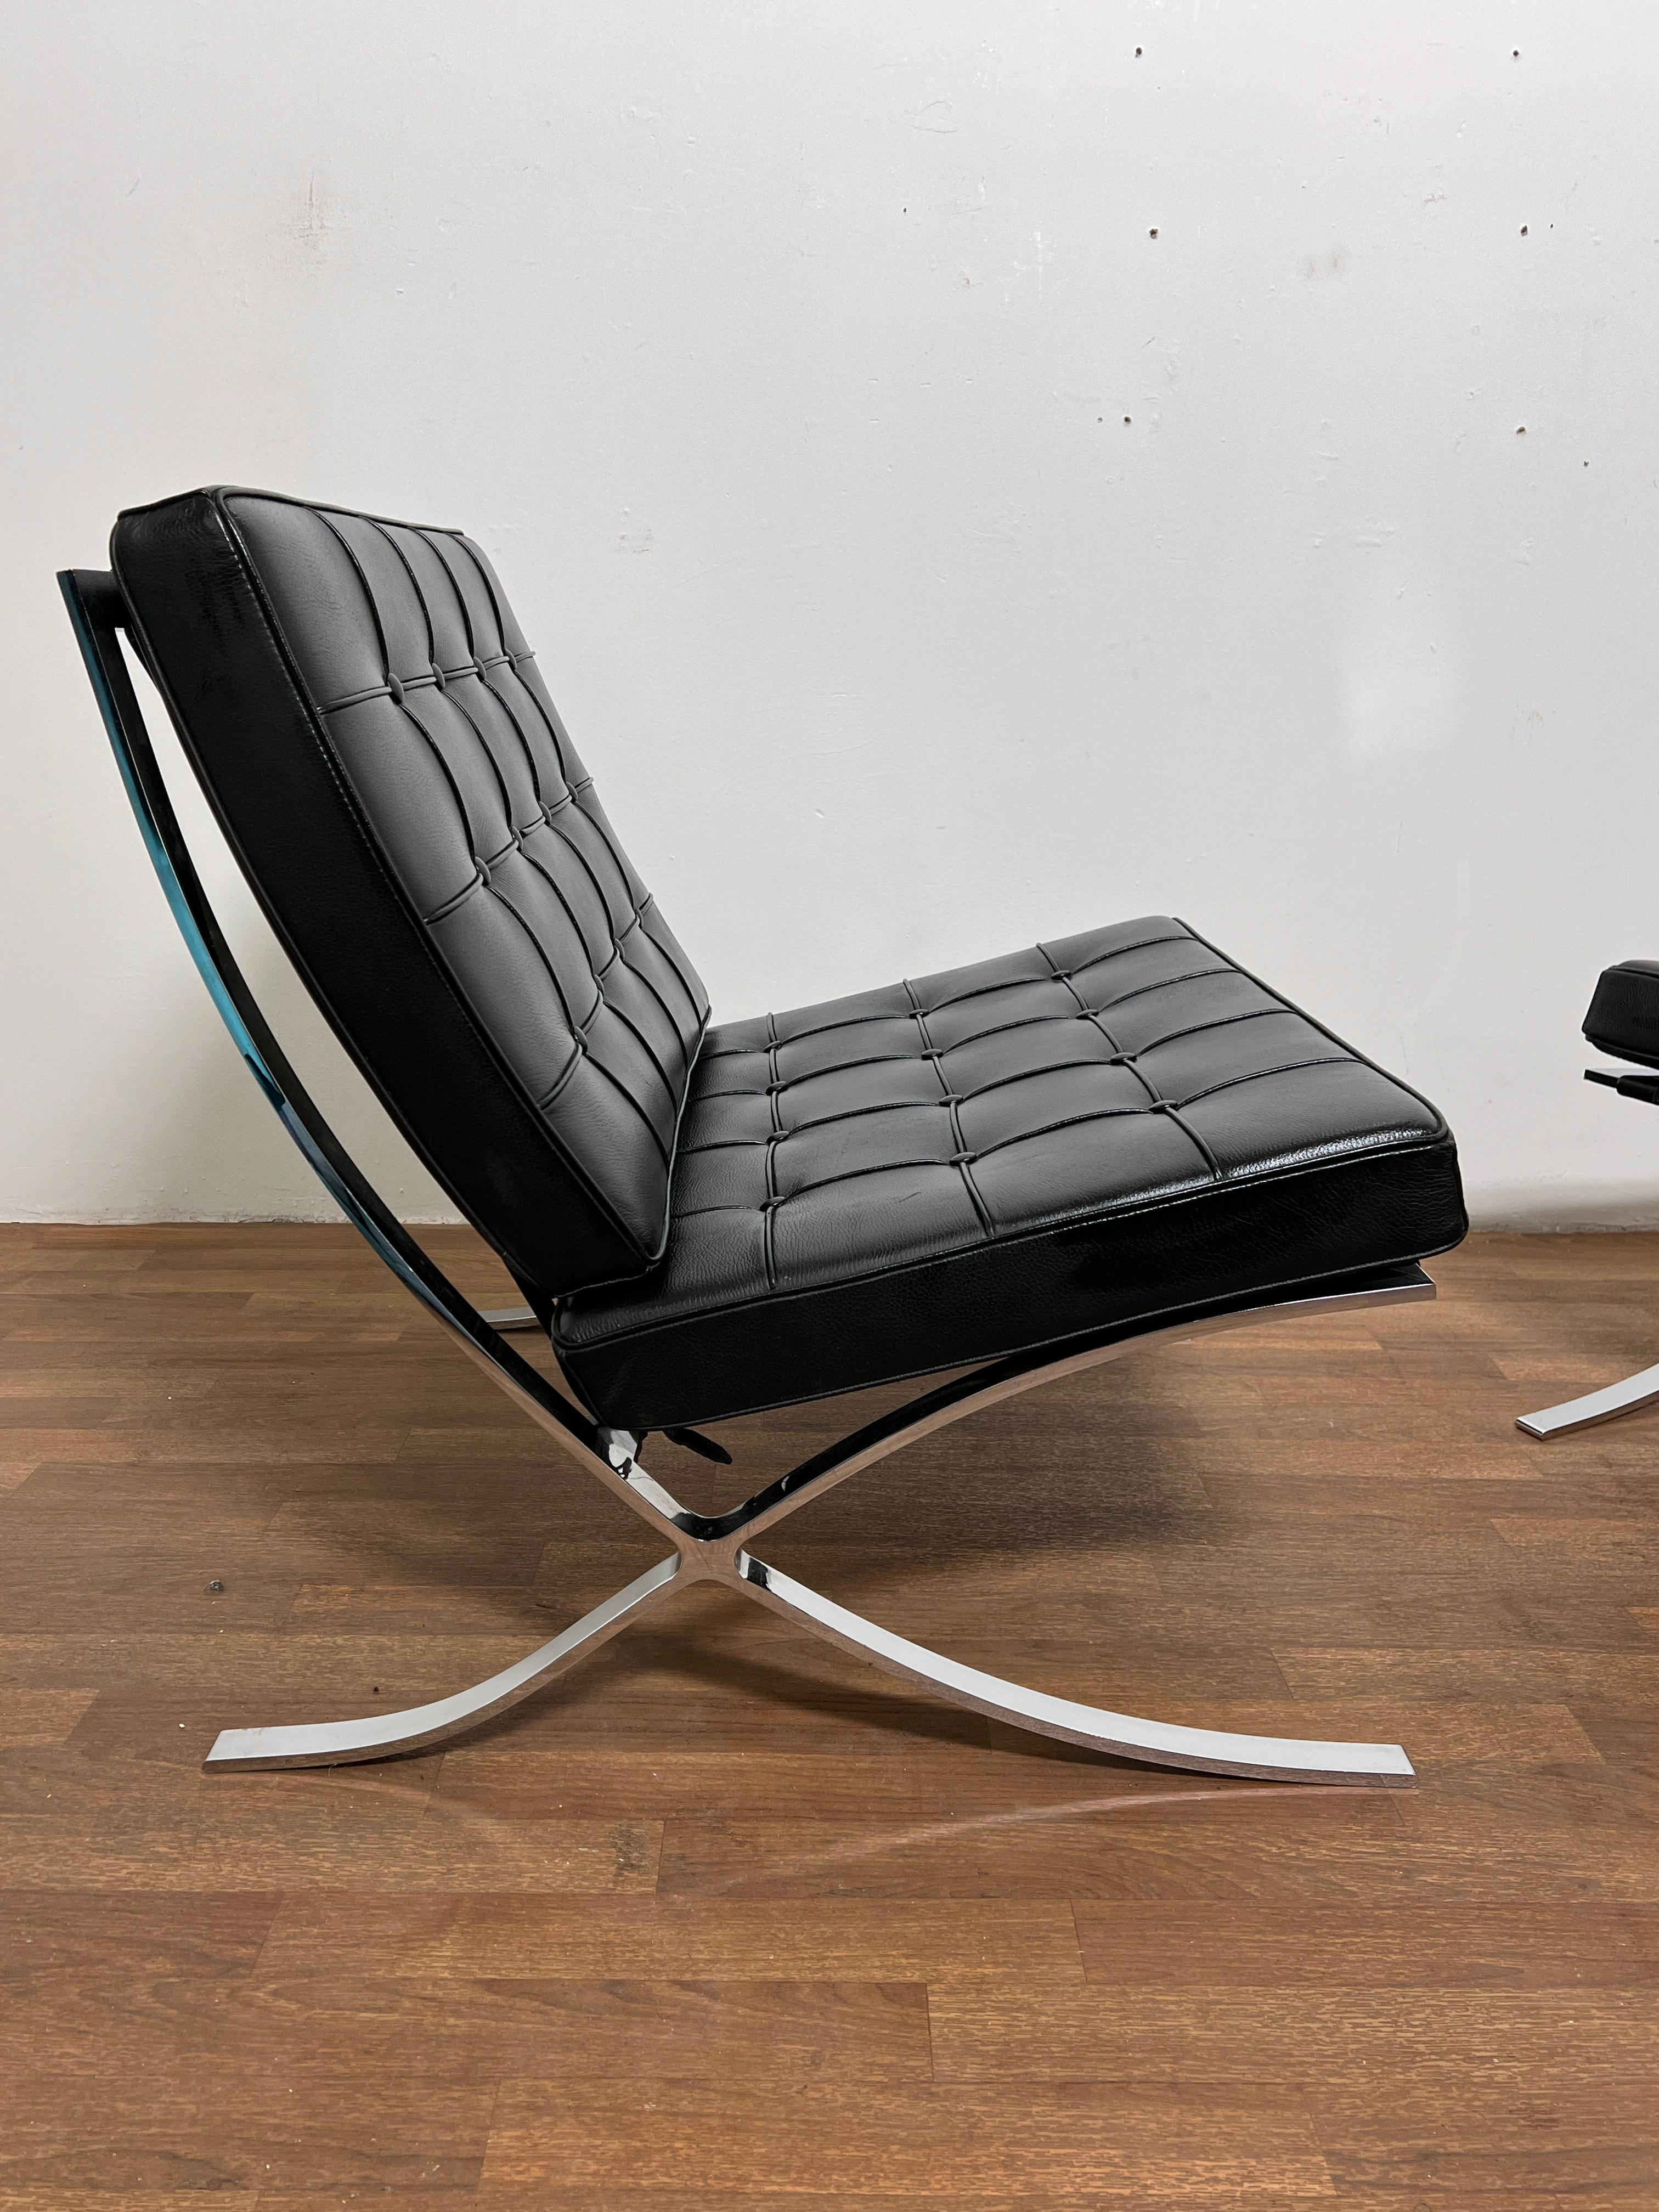 Pair of high quality reproduction Mies Van der Rohe Barcelona style chairs in leather and chrome, made in Italy for Gordon International, ca. 1990s.